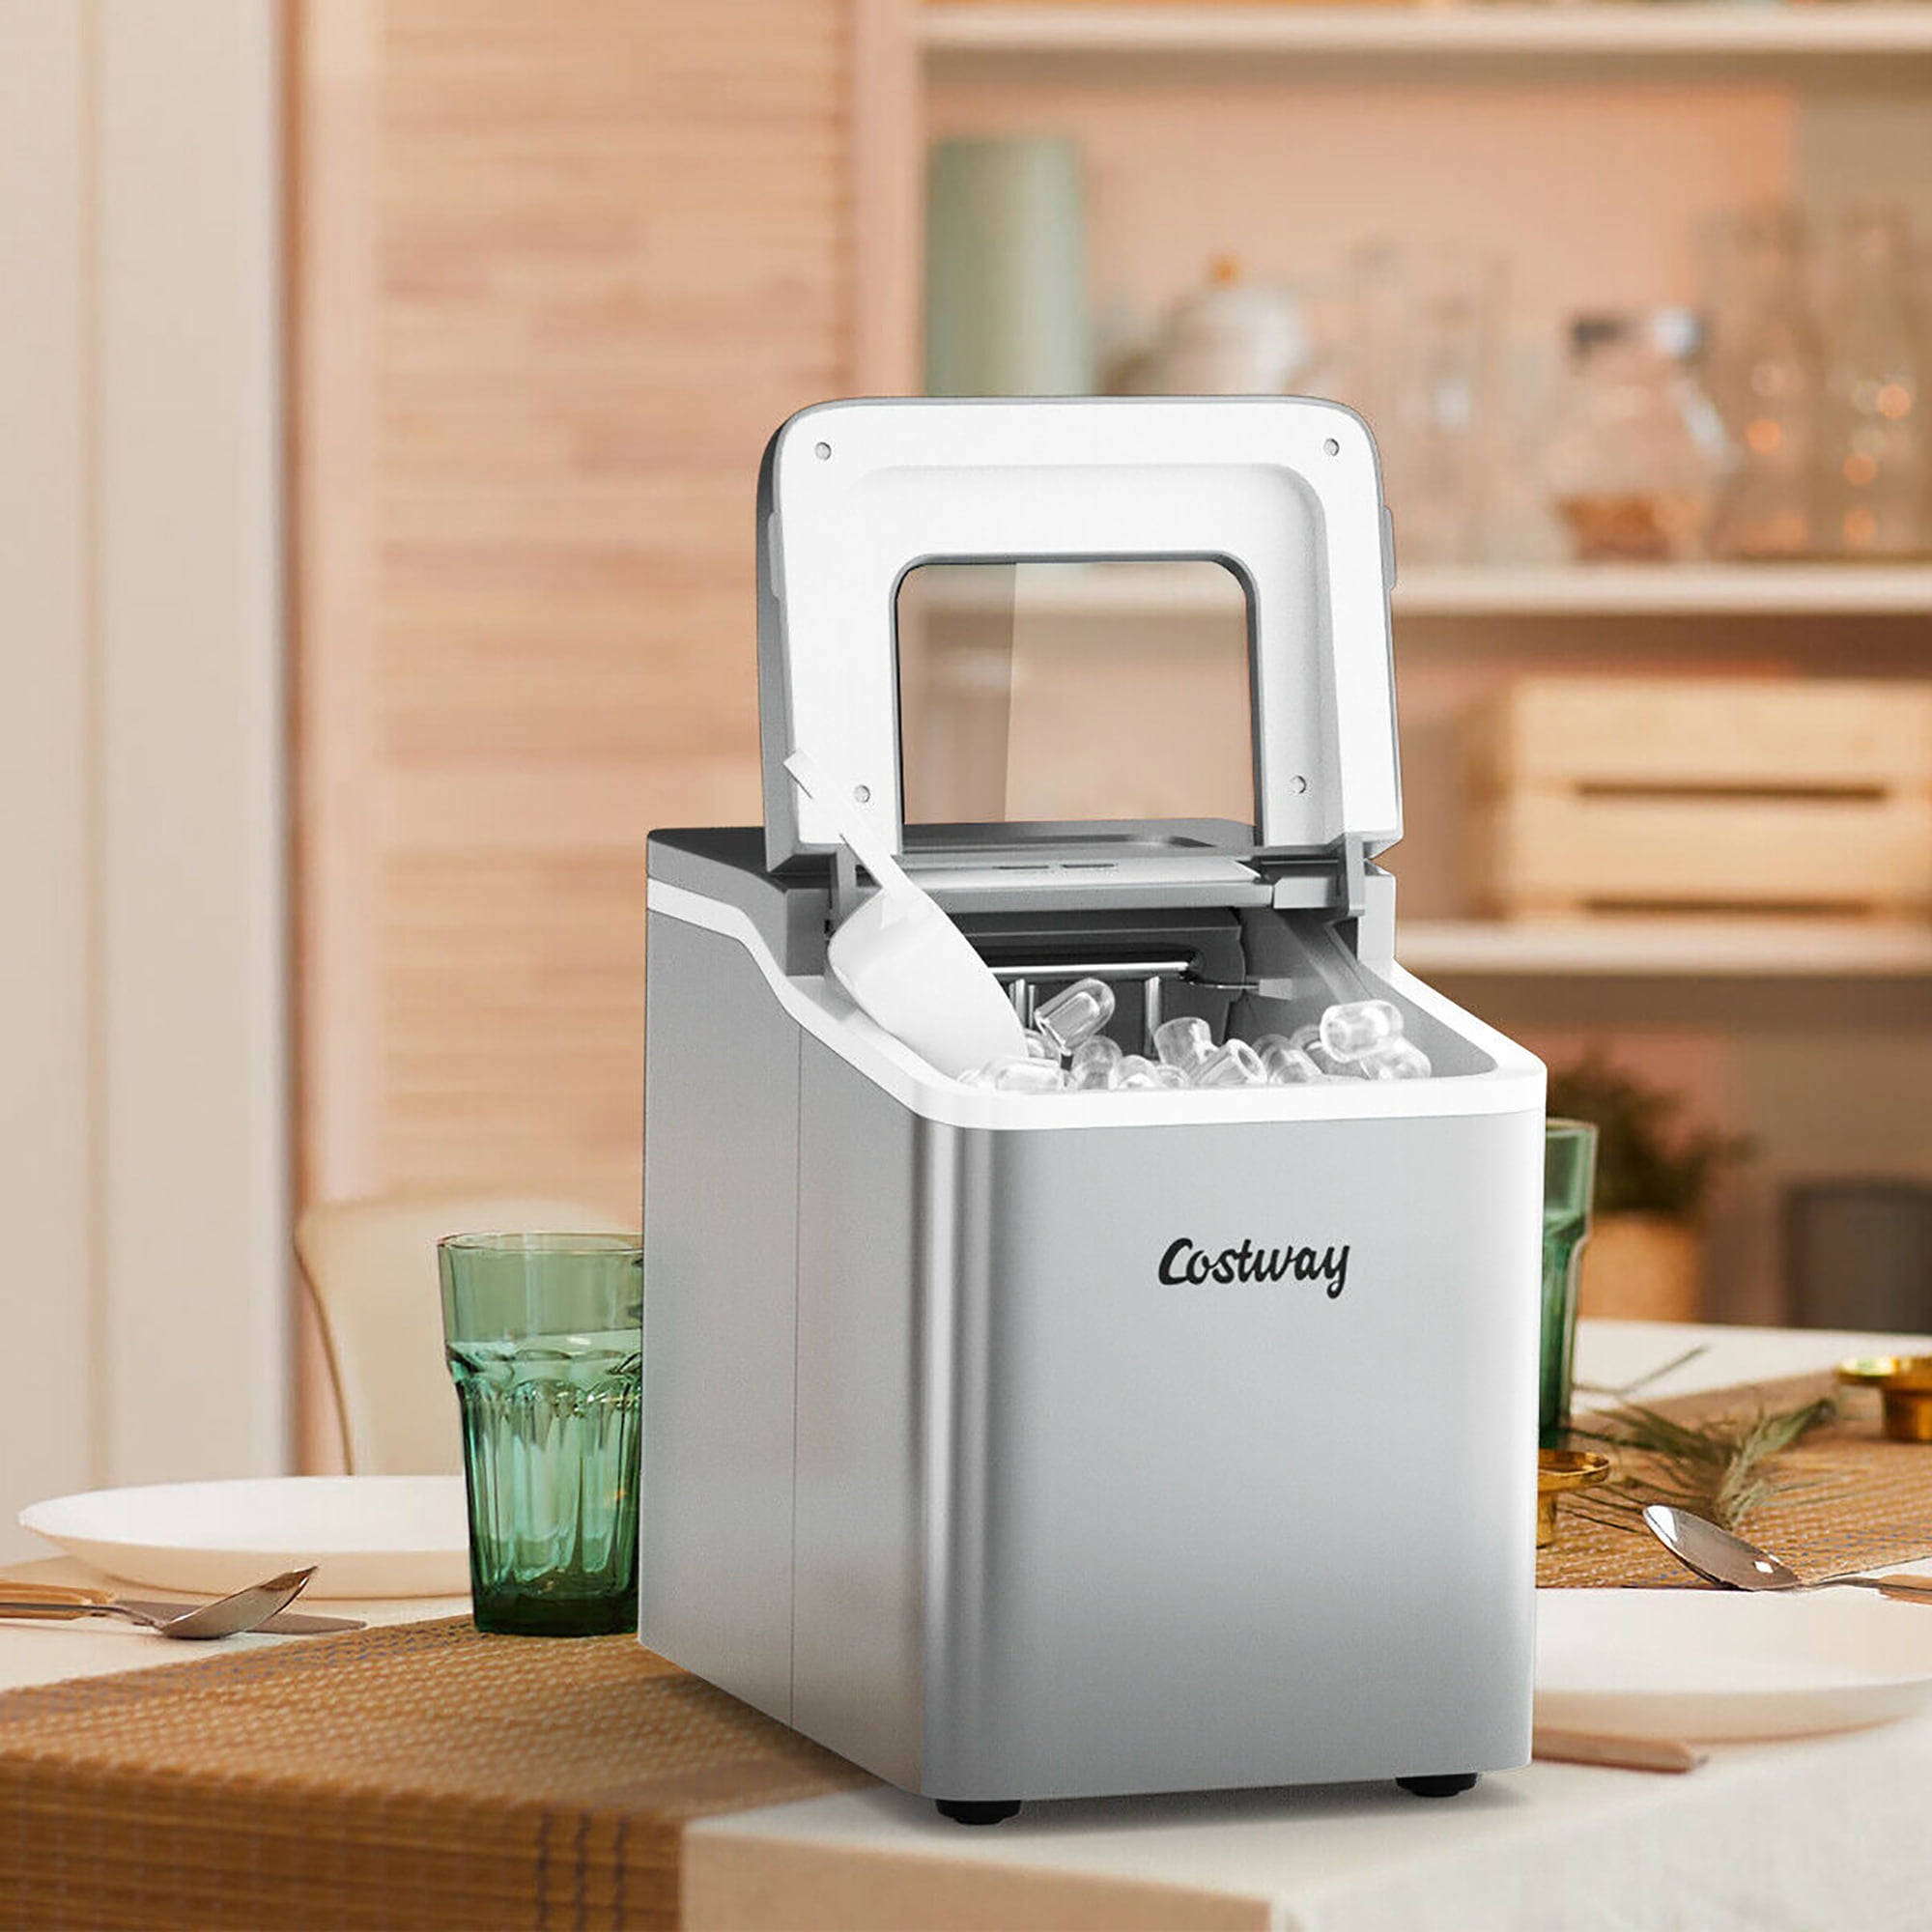 Costway Portable Countertop Ice Maker Machine 44Lbs/24H Self-Clean with Scoop Green